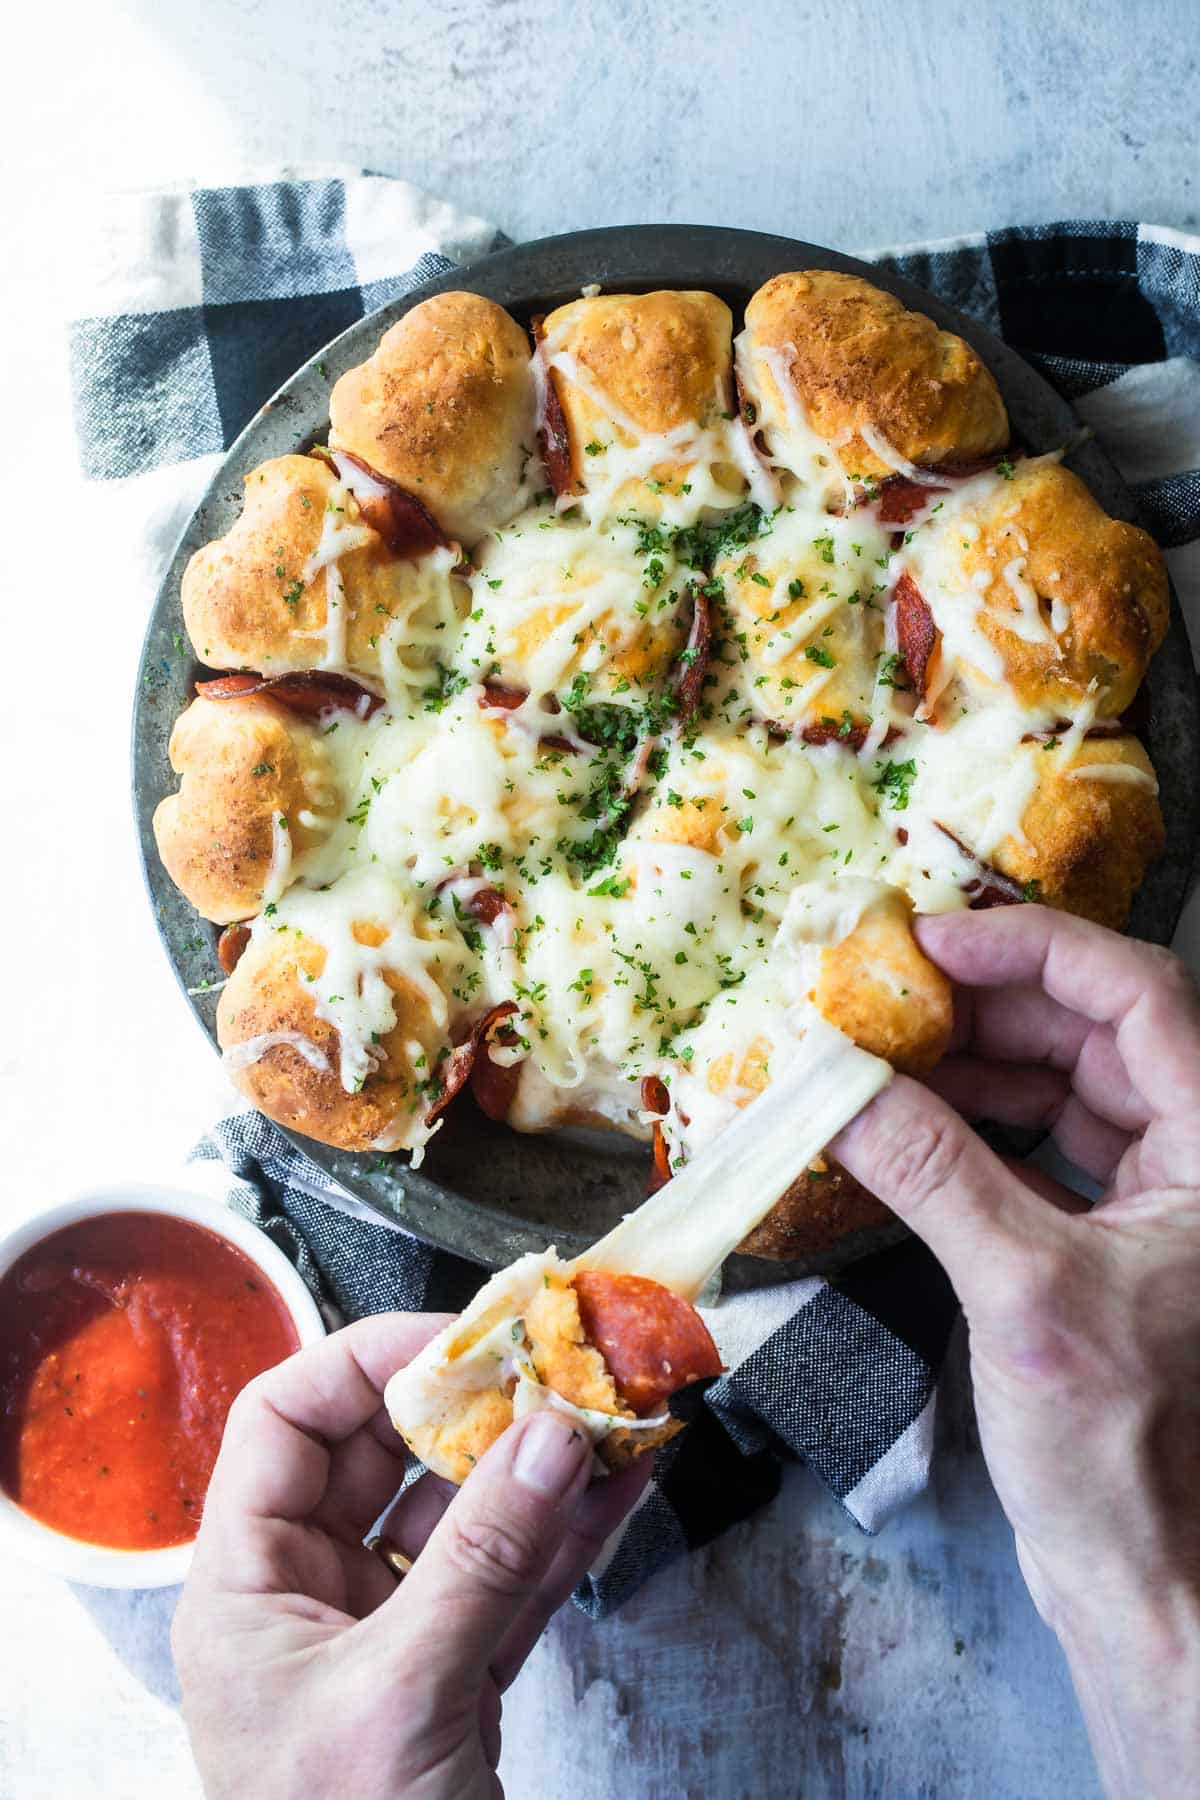 Pepperoni pizza bites being pulled apart.